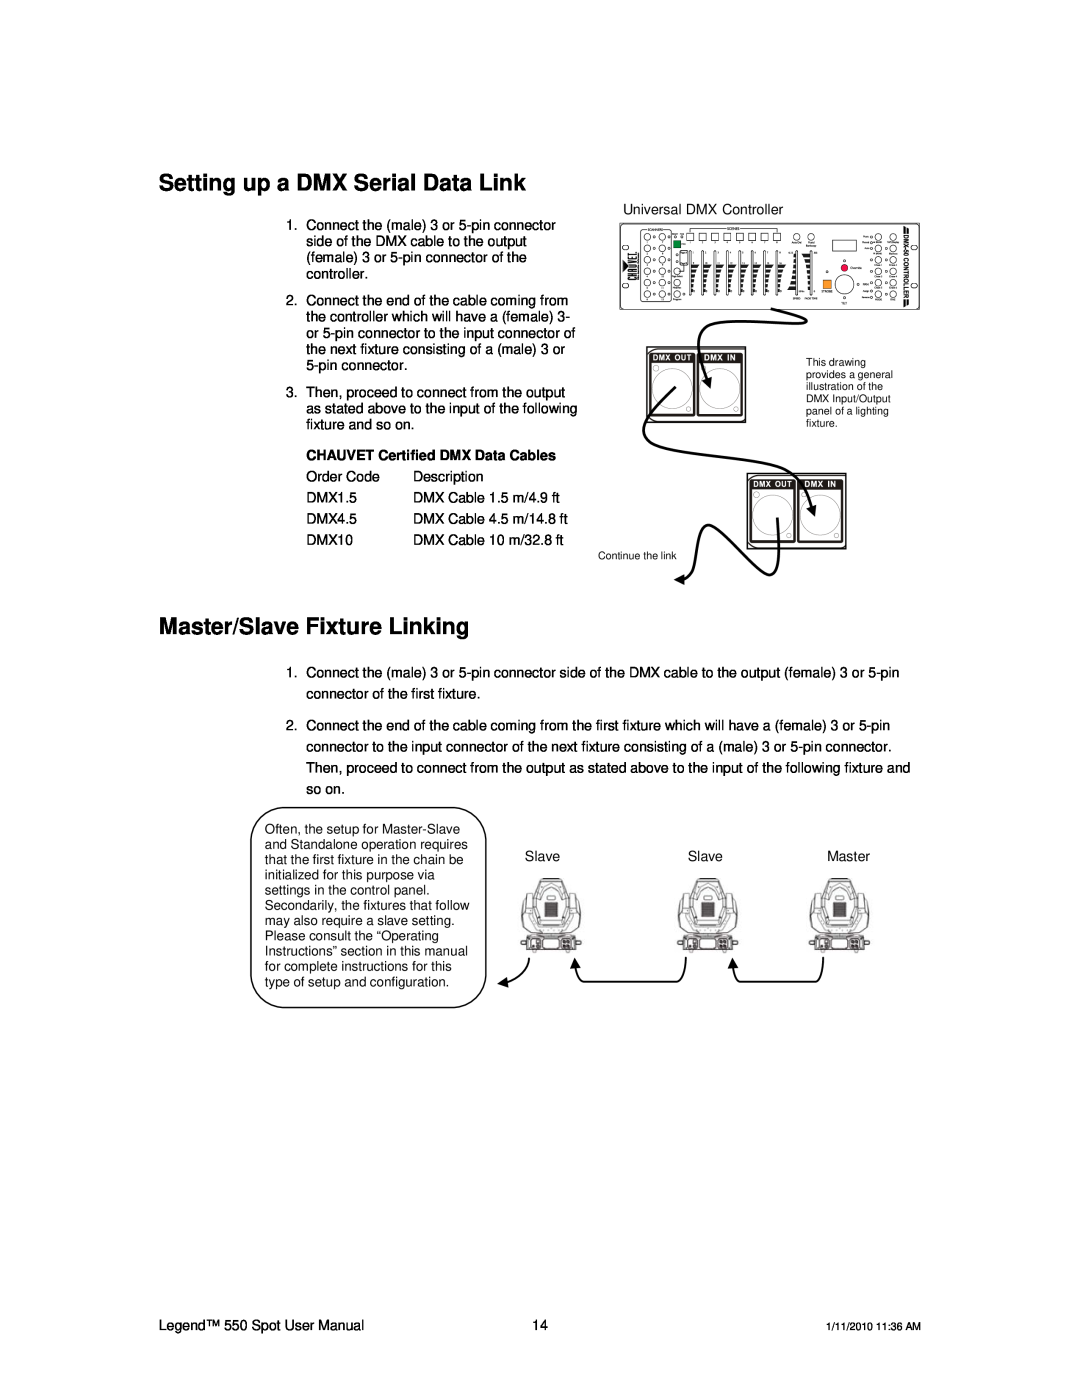 Chauvet 550 user manual Setting up a DMX Serial Data Link, Master/Slave Fixture Linking, CHAUVET Certified DMX Data Cables 